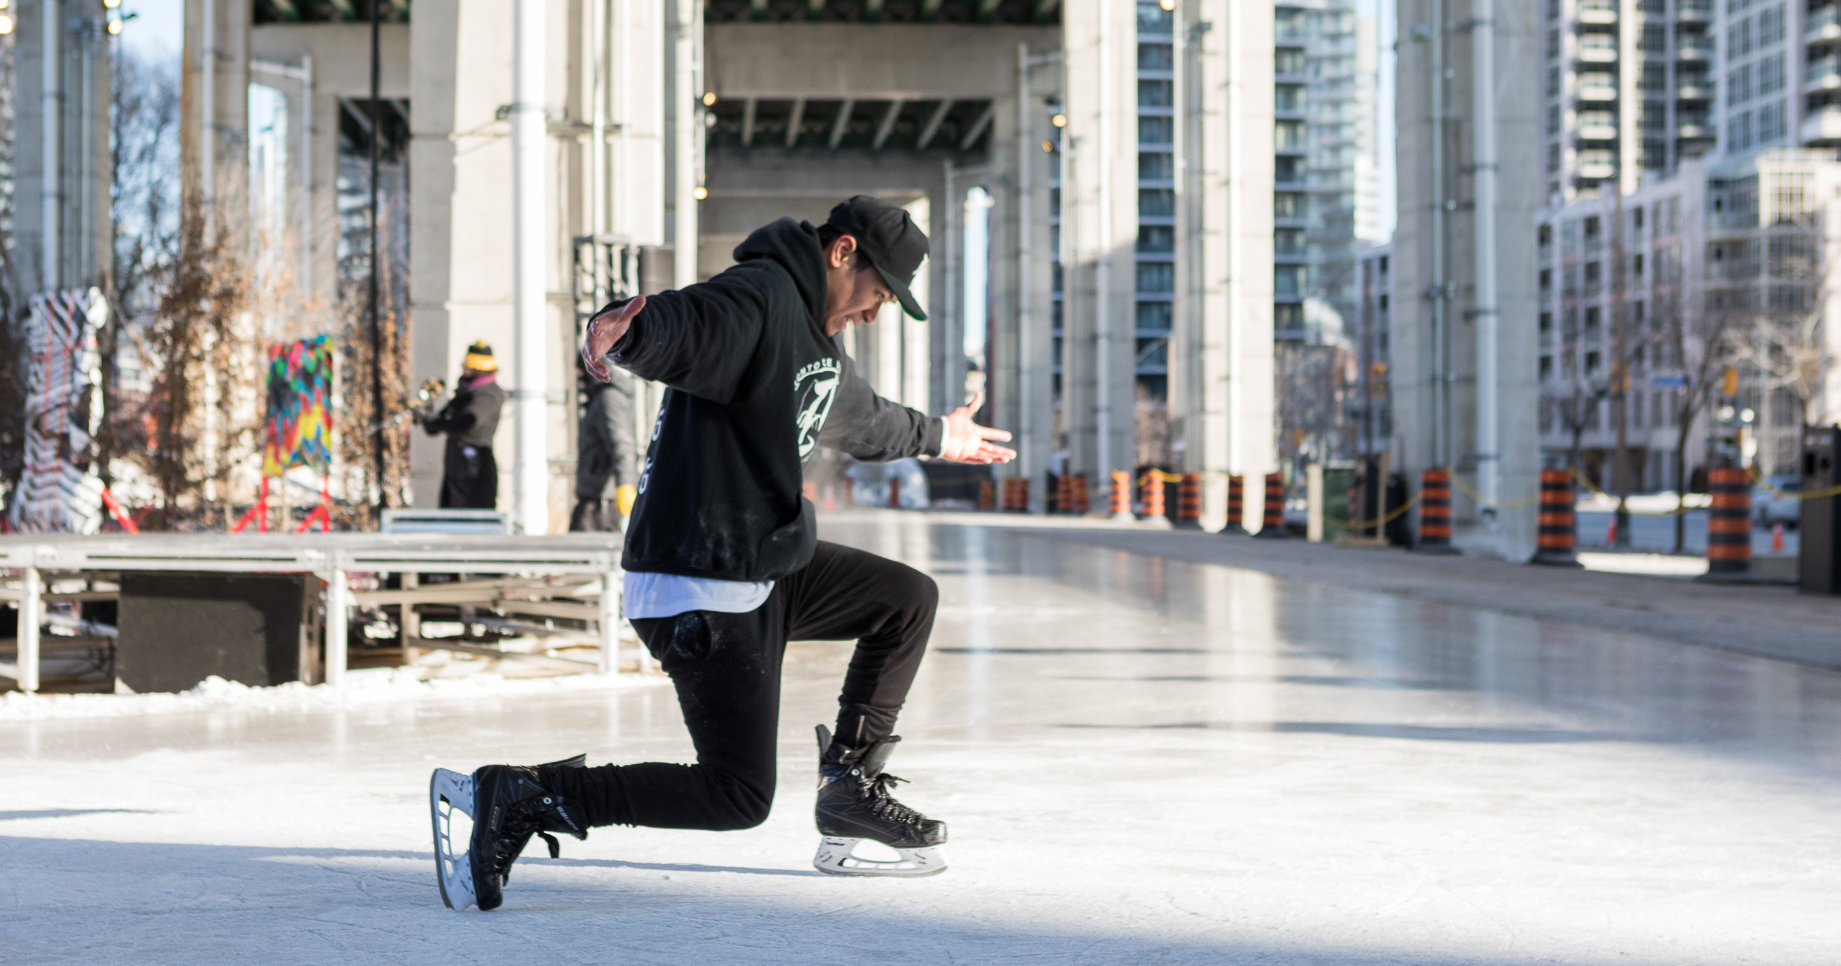 Free Skate Lessons - The Bentway